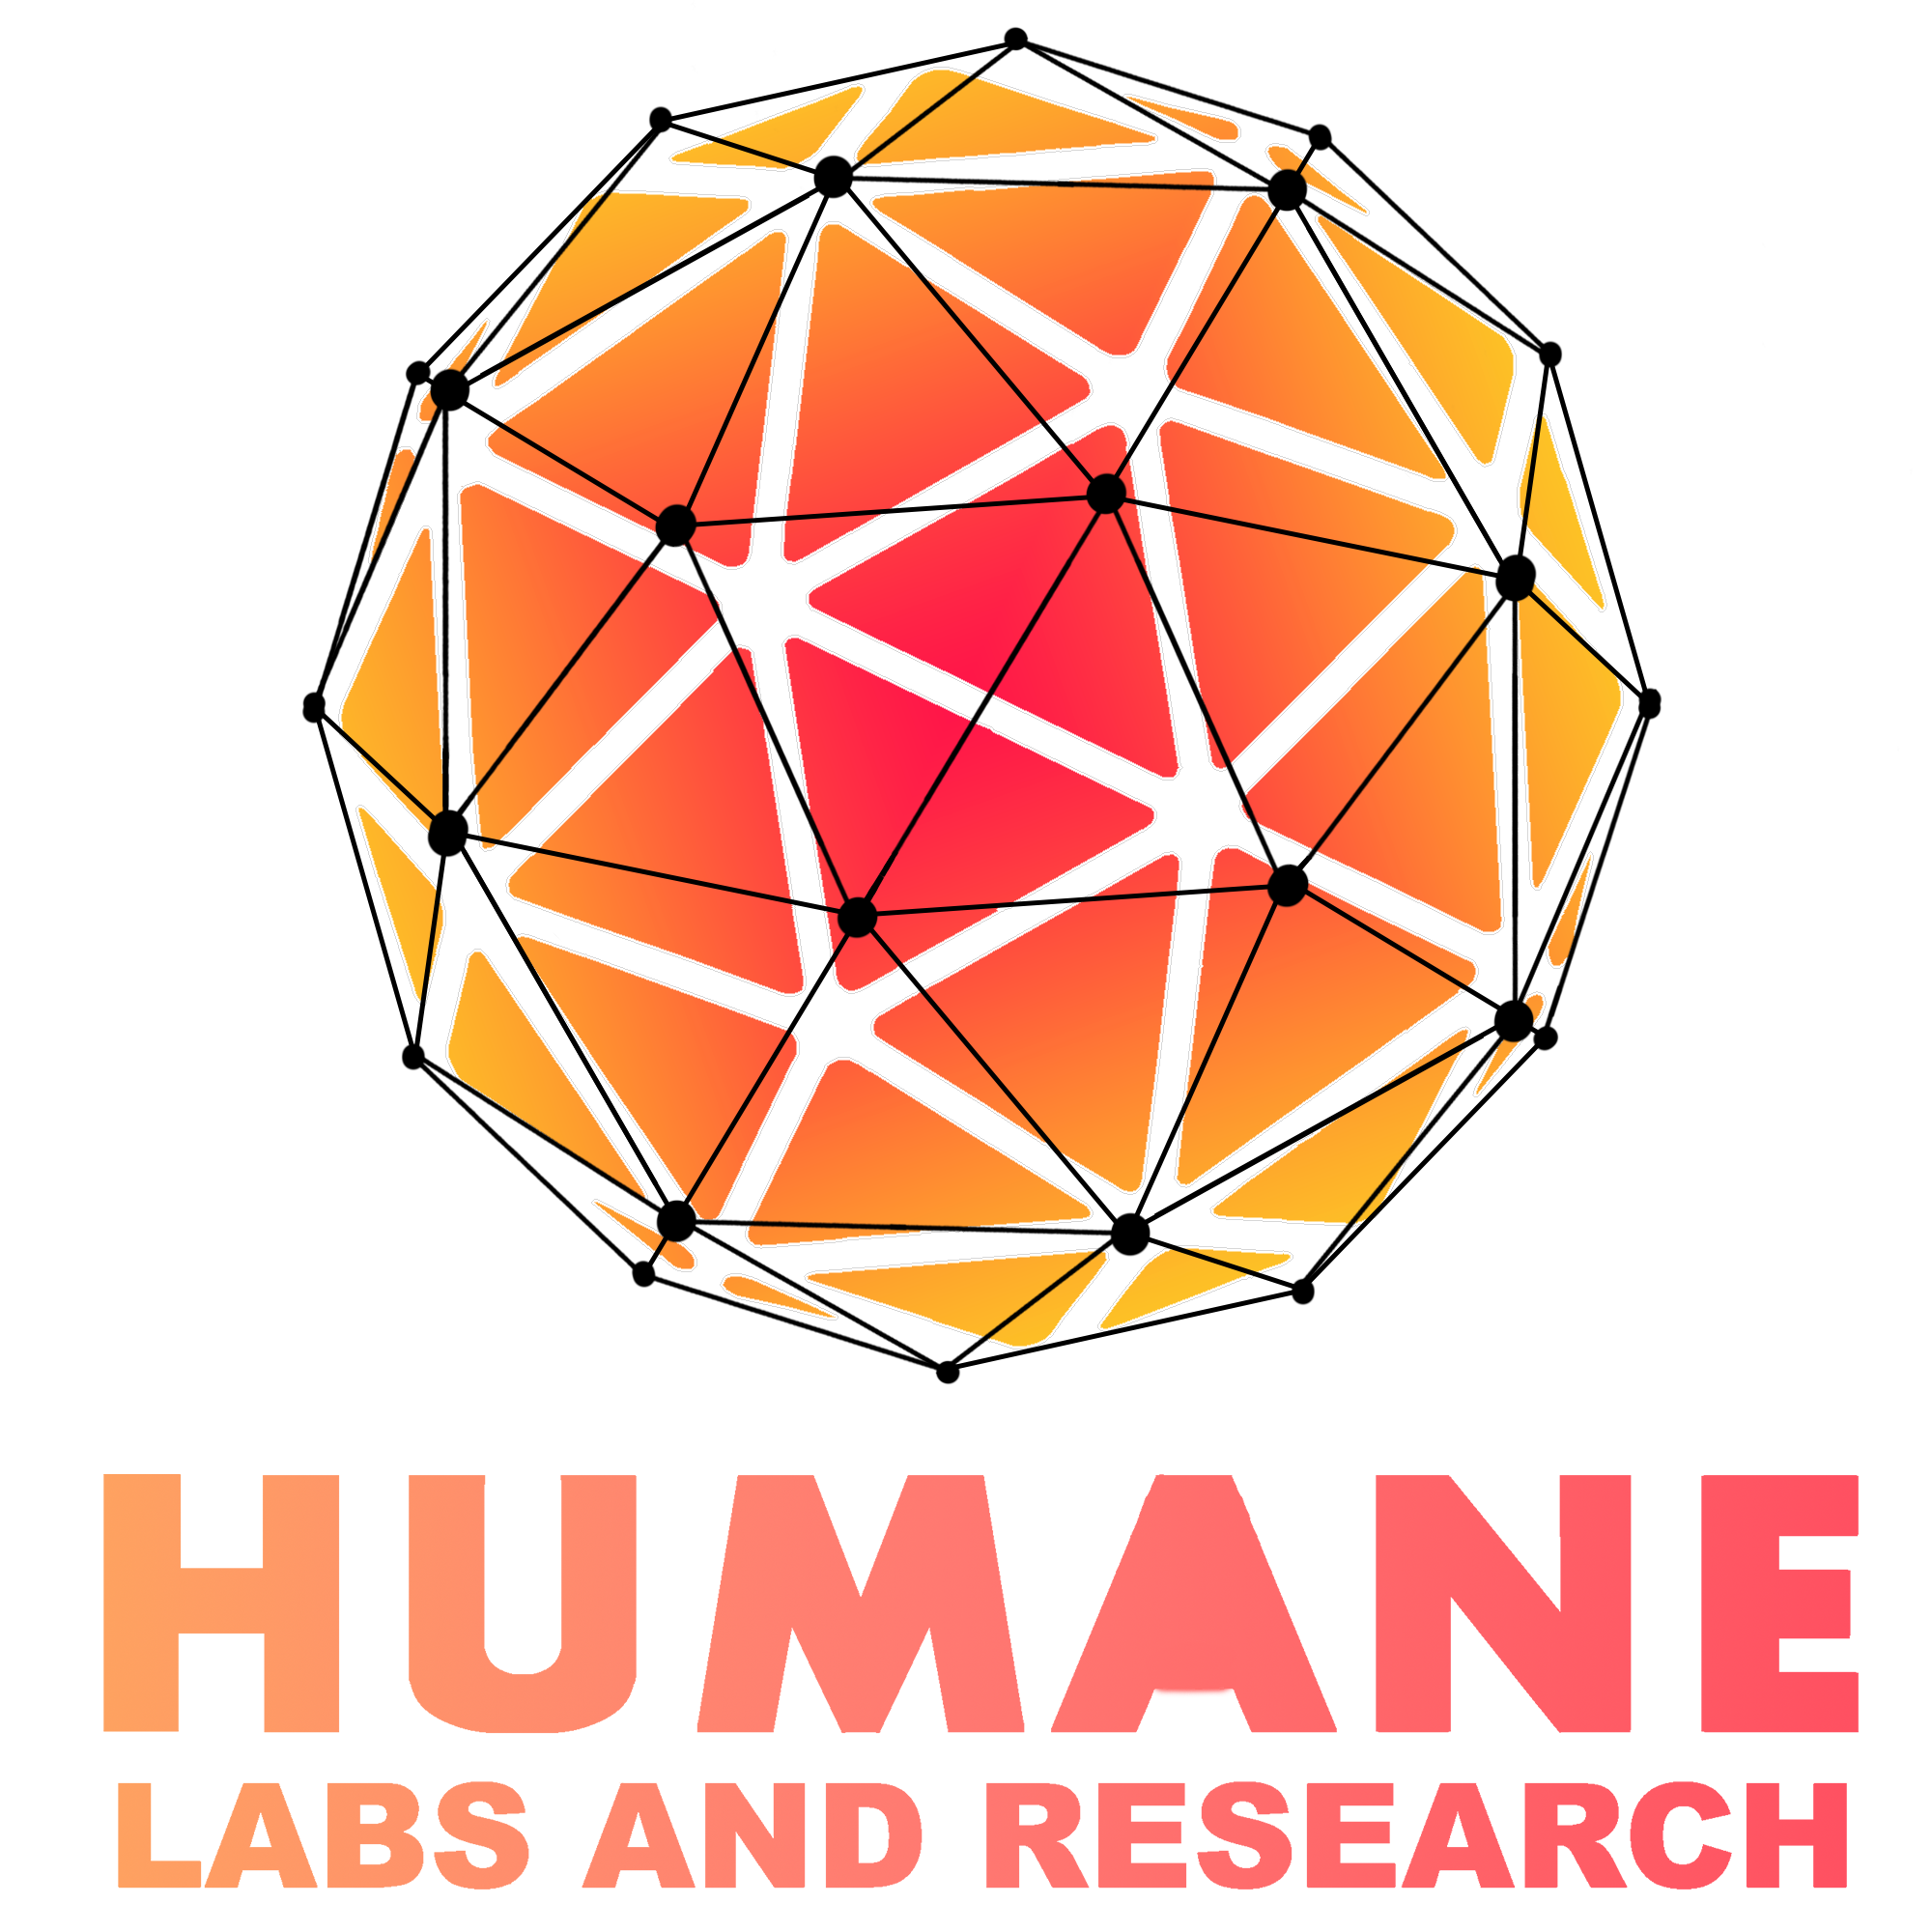 Humane labs and research company гта 5 фото 86